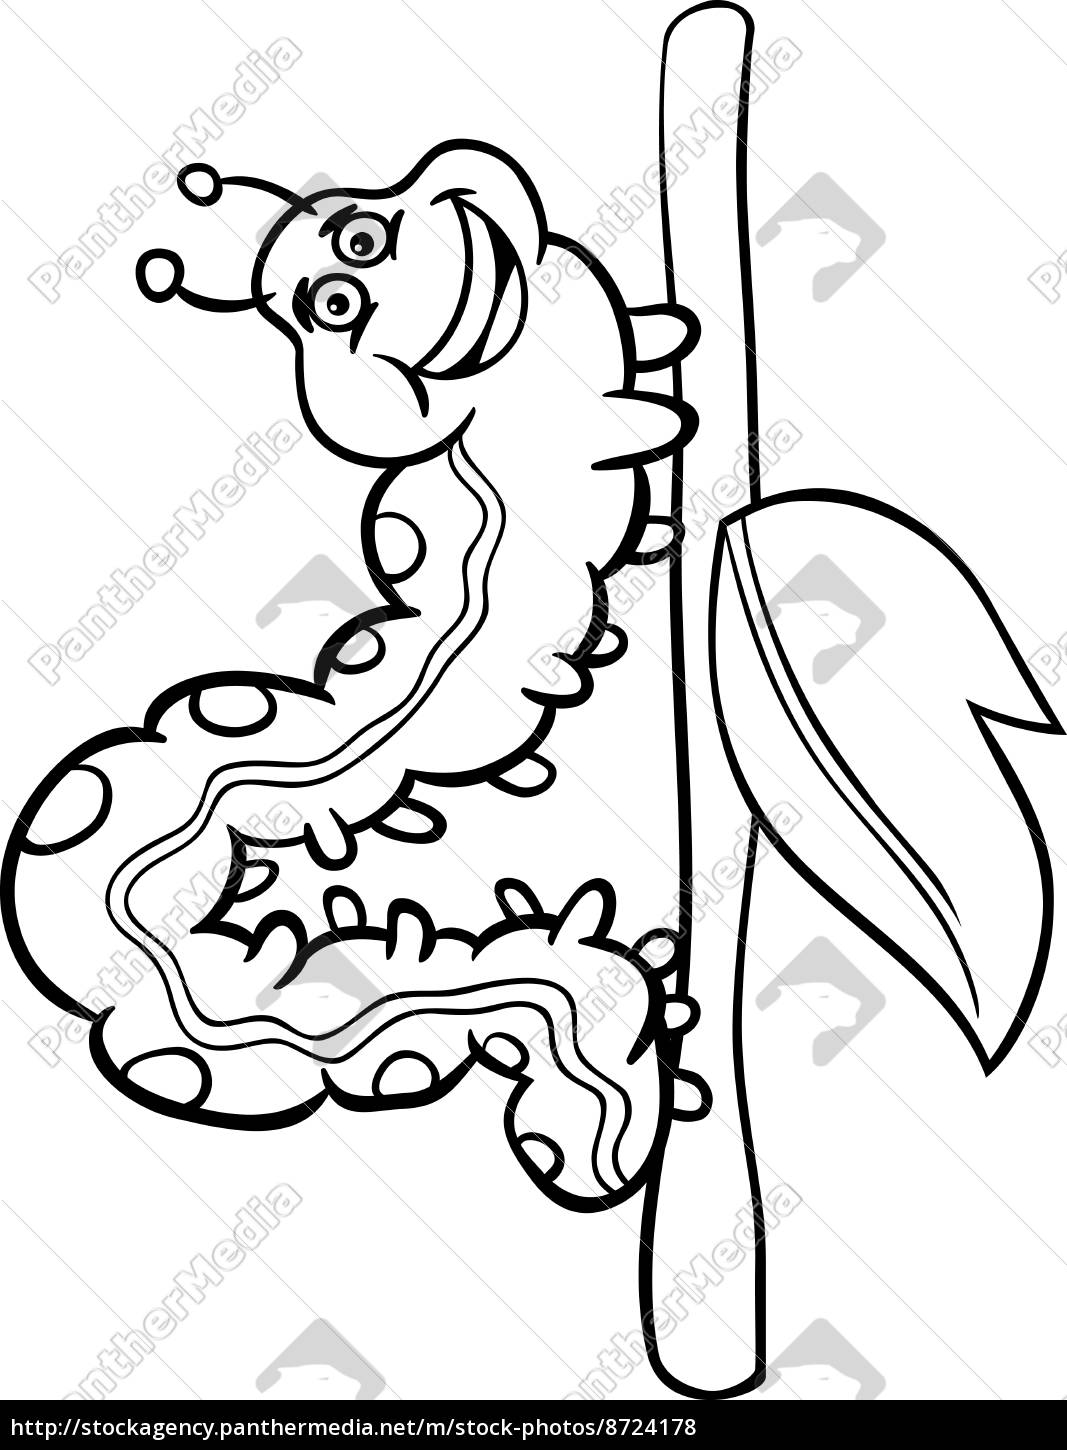 Stock　for　cartoon　PantherMedia　#8724178　Stock　image　coloring　book　insect　caterpillar　Agency